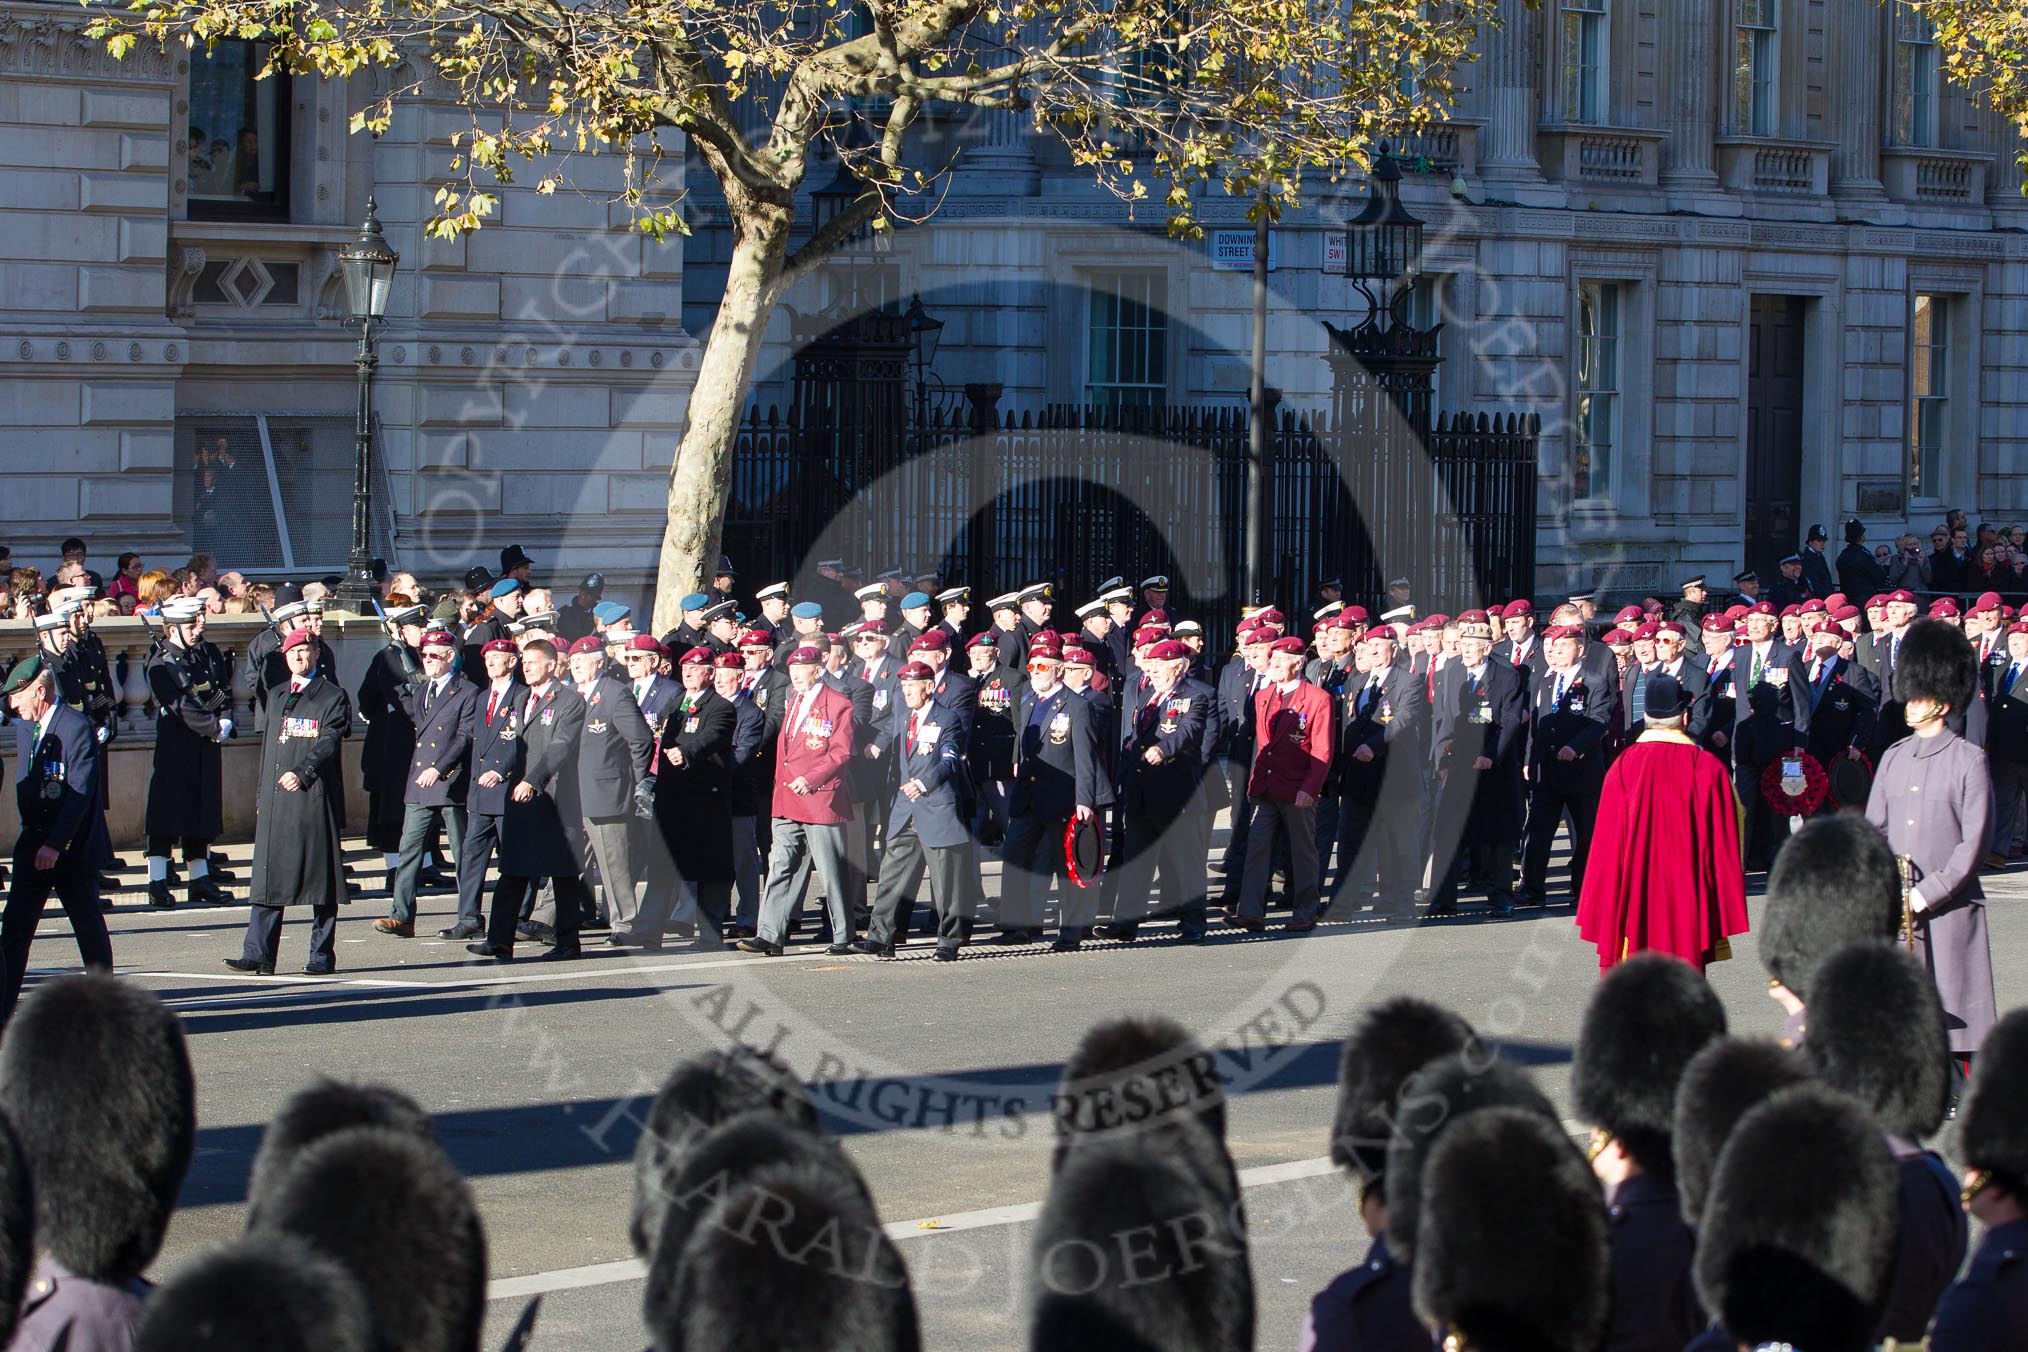 Remembrance Sunday 2012 Cenotaph March Past: Group A20 - Parachute Regimental Association..
Whitehall, Cenotaph,
London SW1,

United Kingdom,
on 11 November 2012 at 11:50, image #675